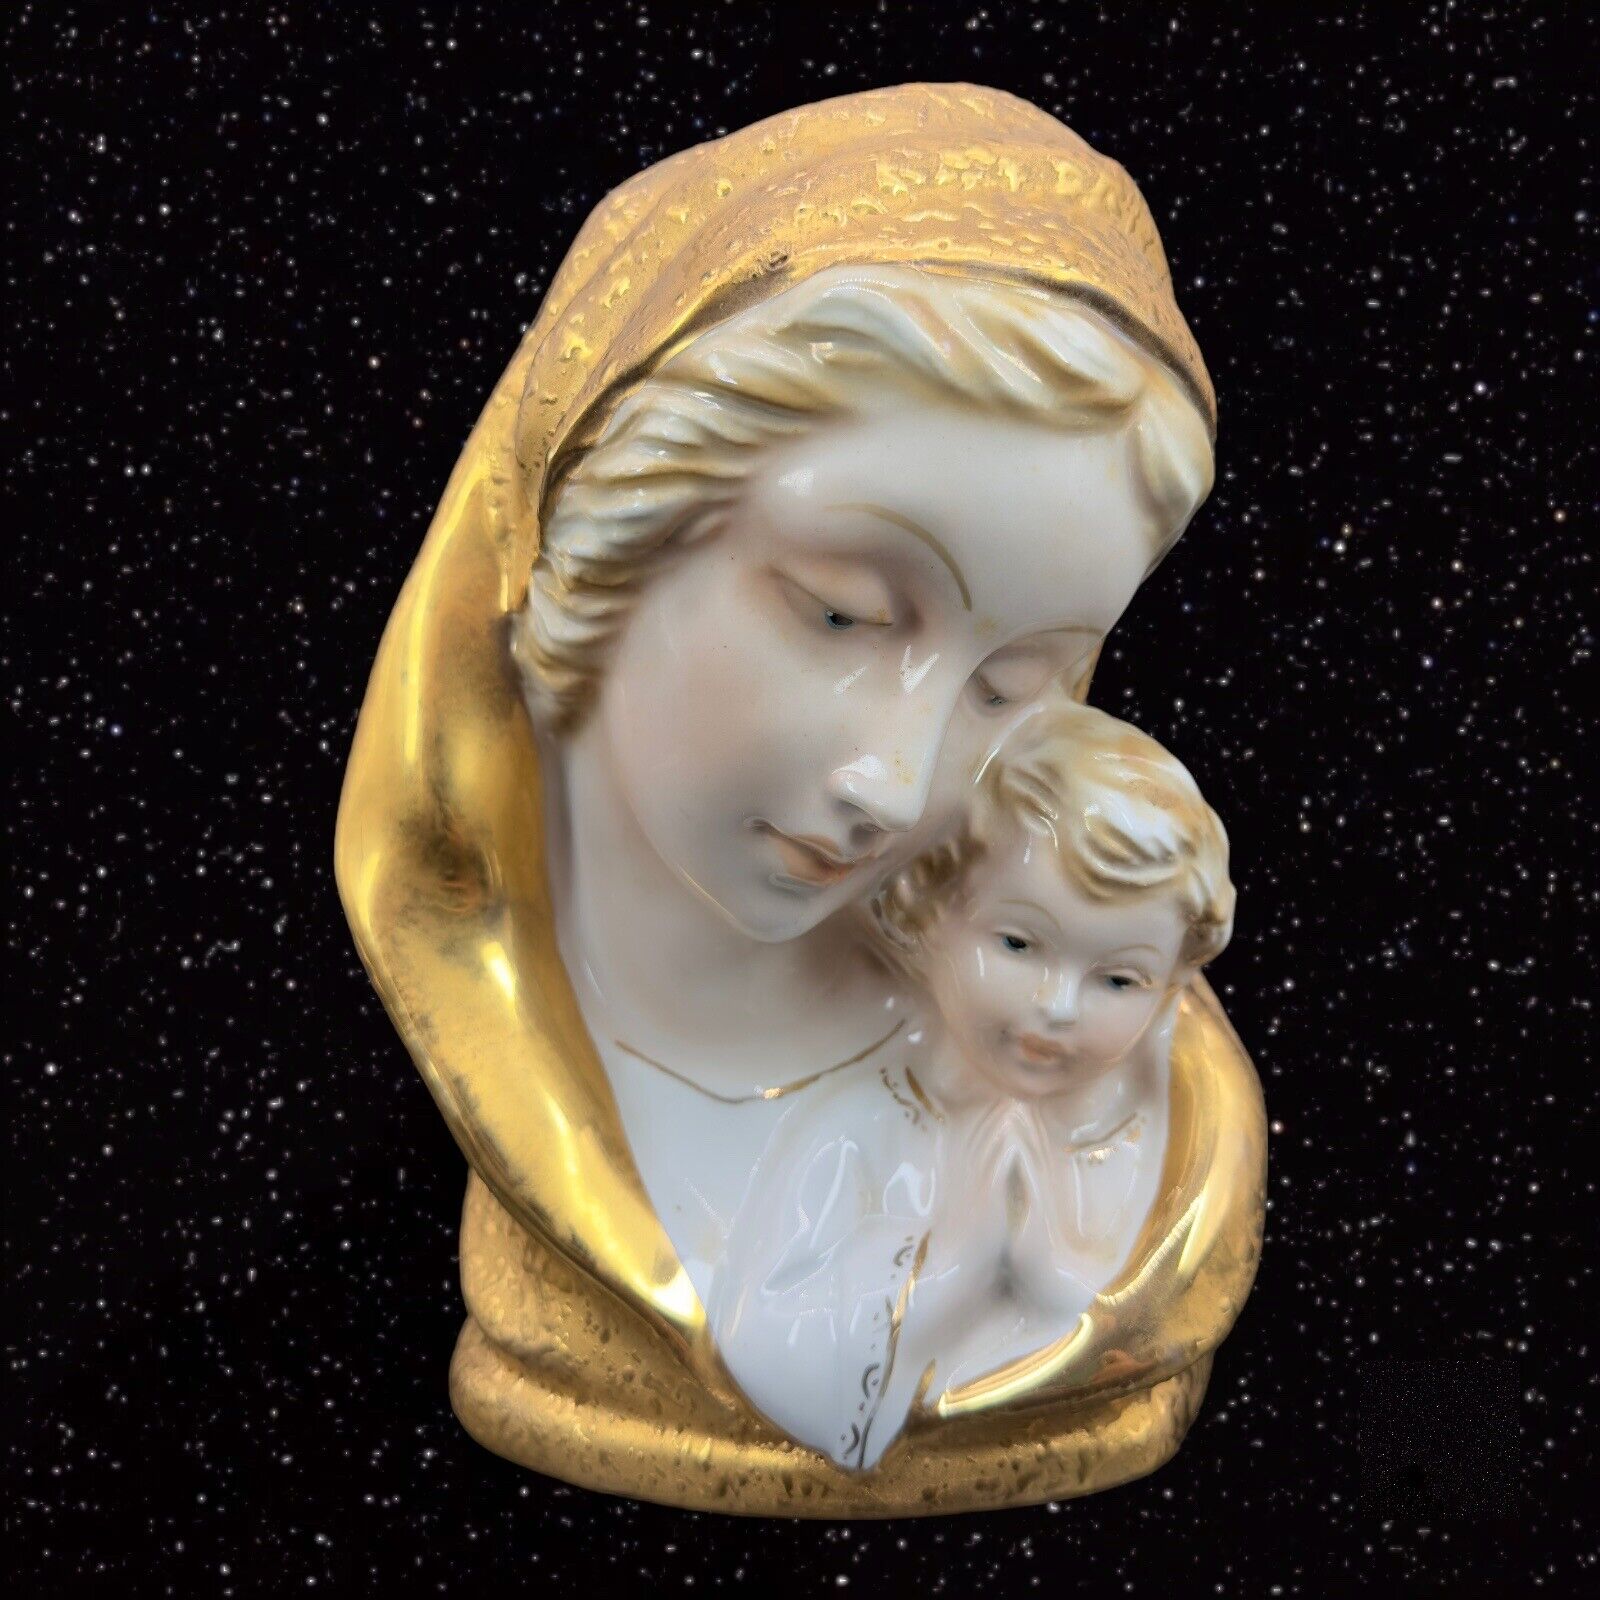 Madonna And Child Hand Painted Porcelain Figurine Bust Gold Textured Vintage